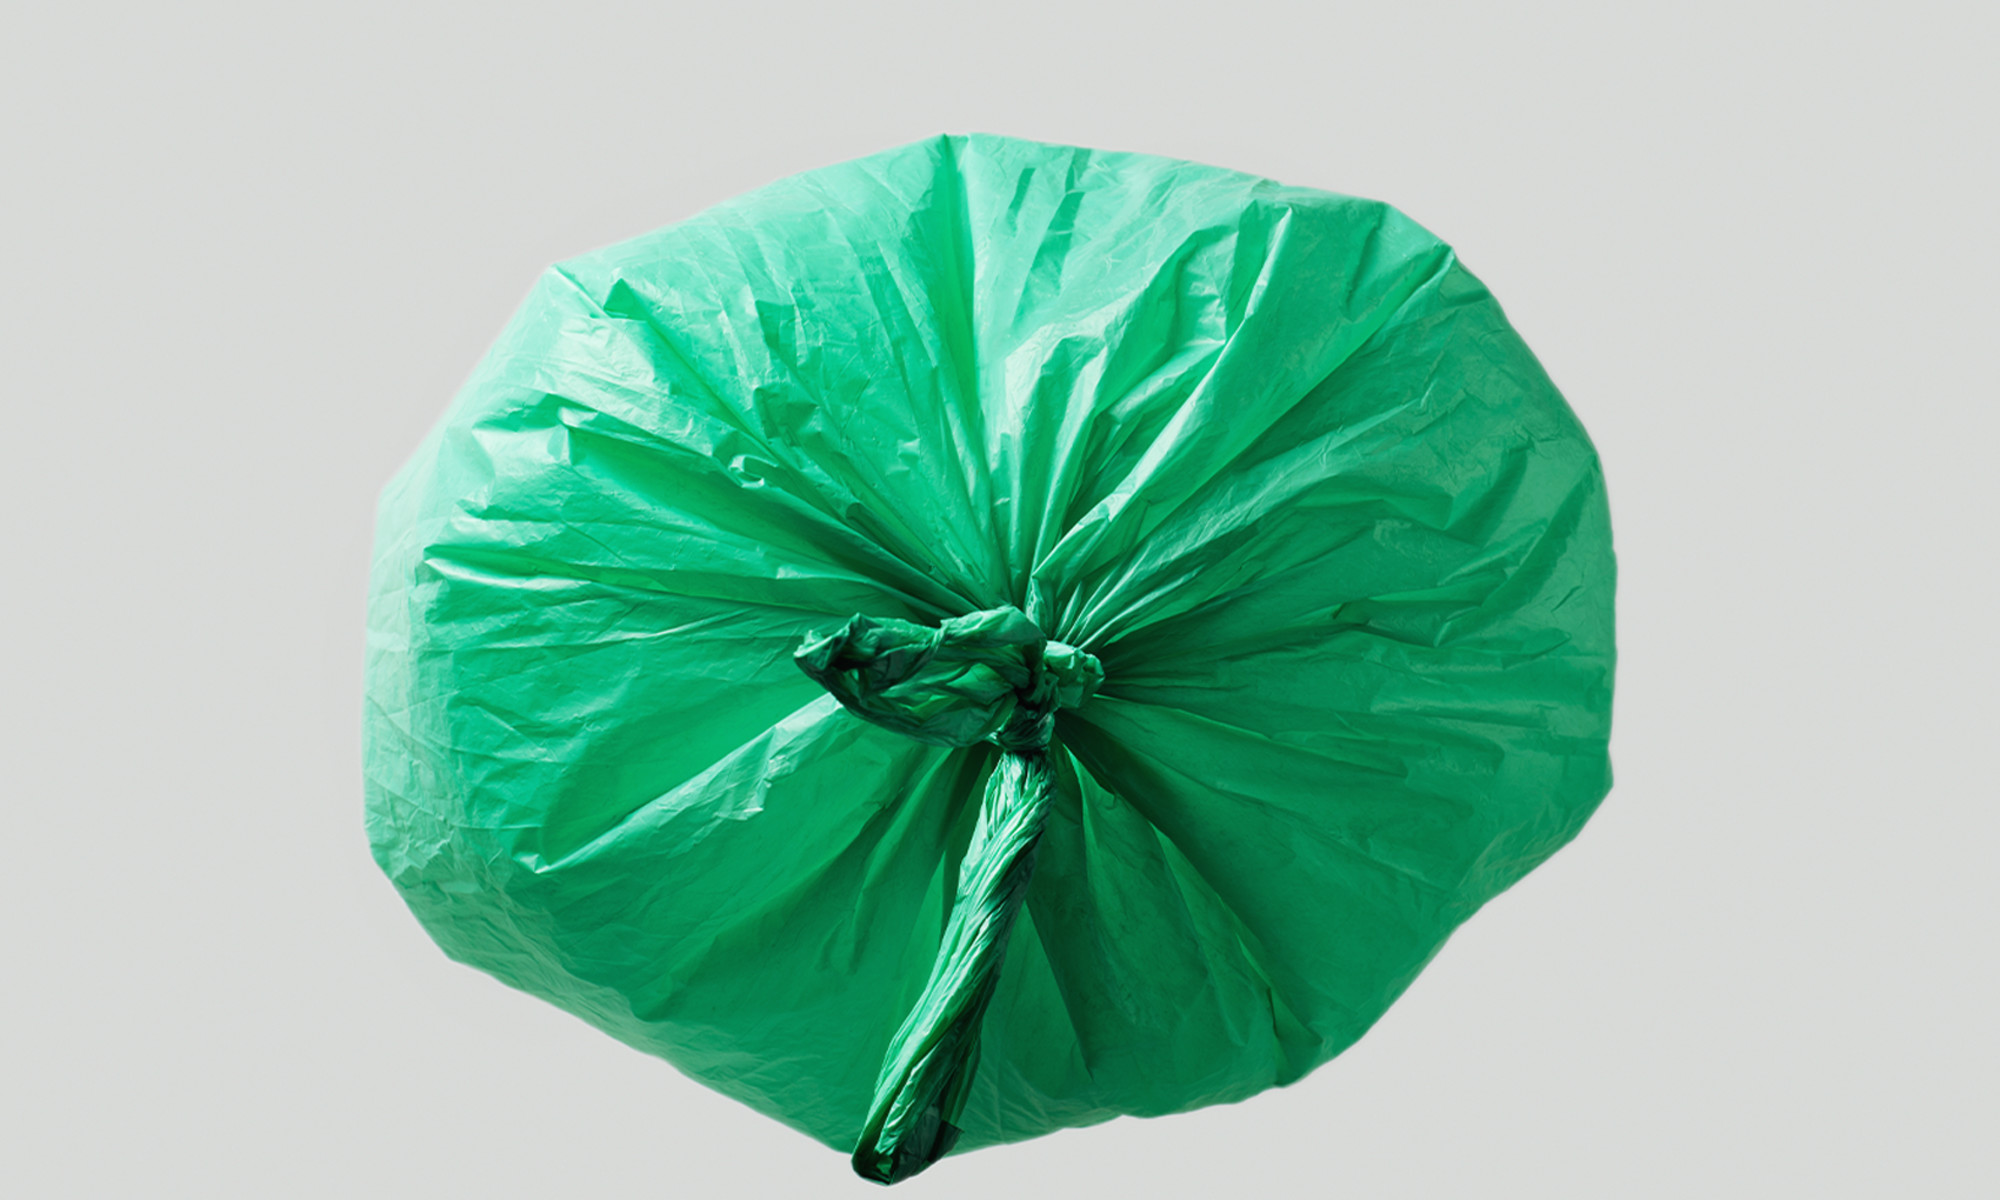 Washable, reusable rubbish bags replace single-use bin liners - Springwise